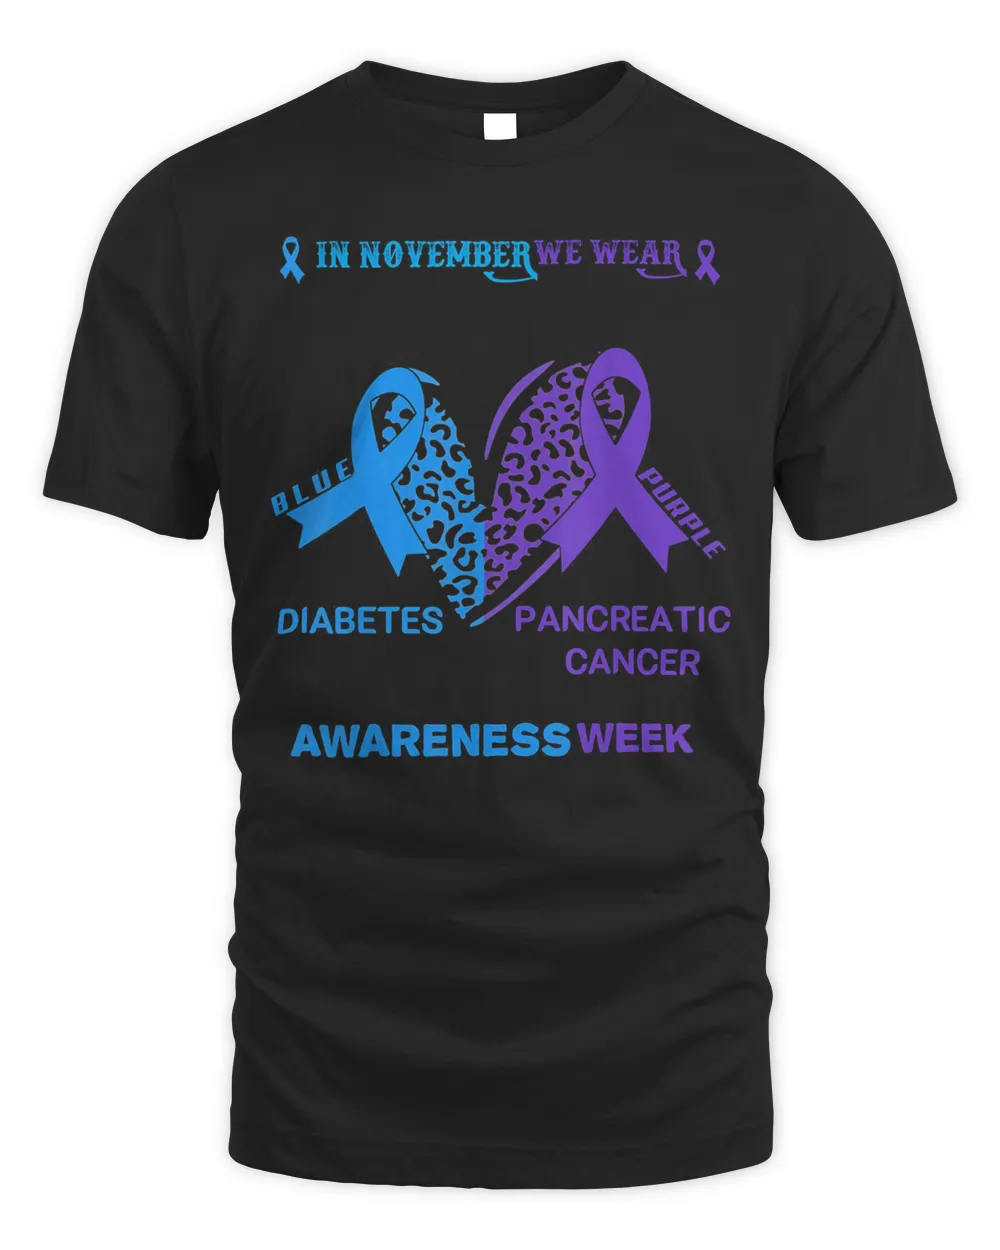 We Wear Blue Purple For Cancer and Diabetes Awareness Week T-Shirt